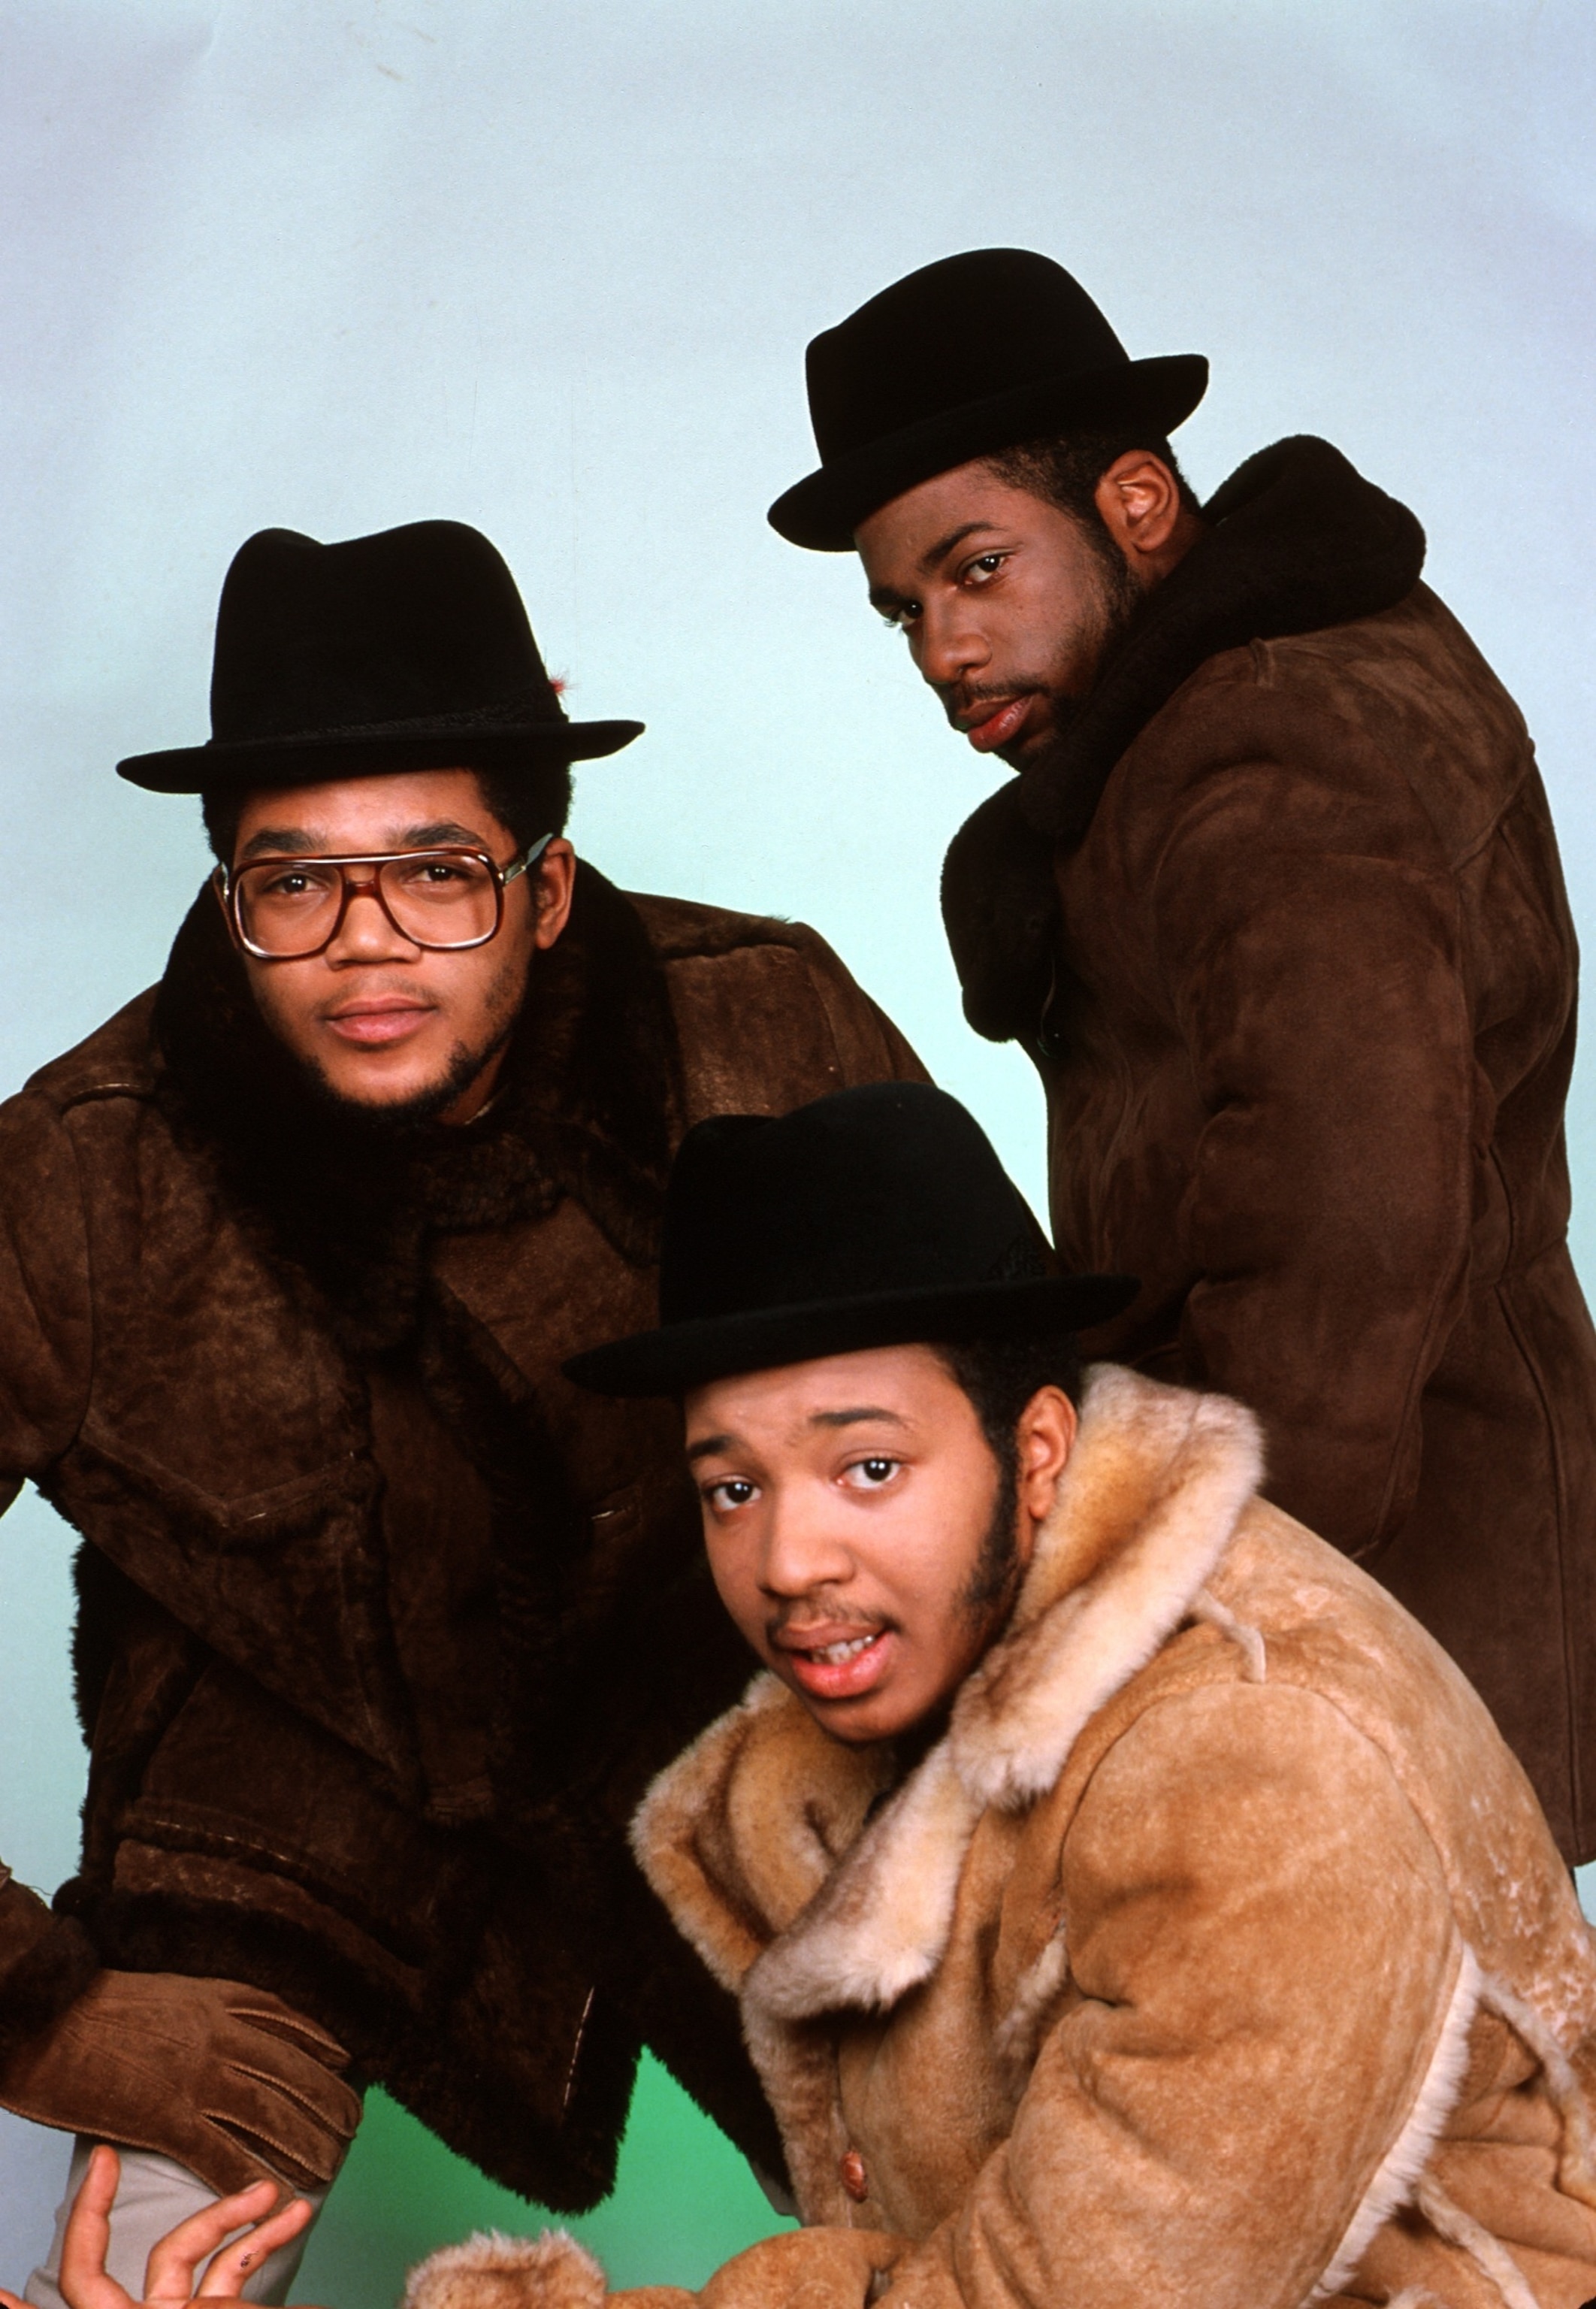 PHOTO: In this 1985 file photo, Darryl McDaniels, left, Joseph Simmons, center, and Jam Master Jay of the hip-hop group Run-D.M.C. pose for a studio portrait session in New York.